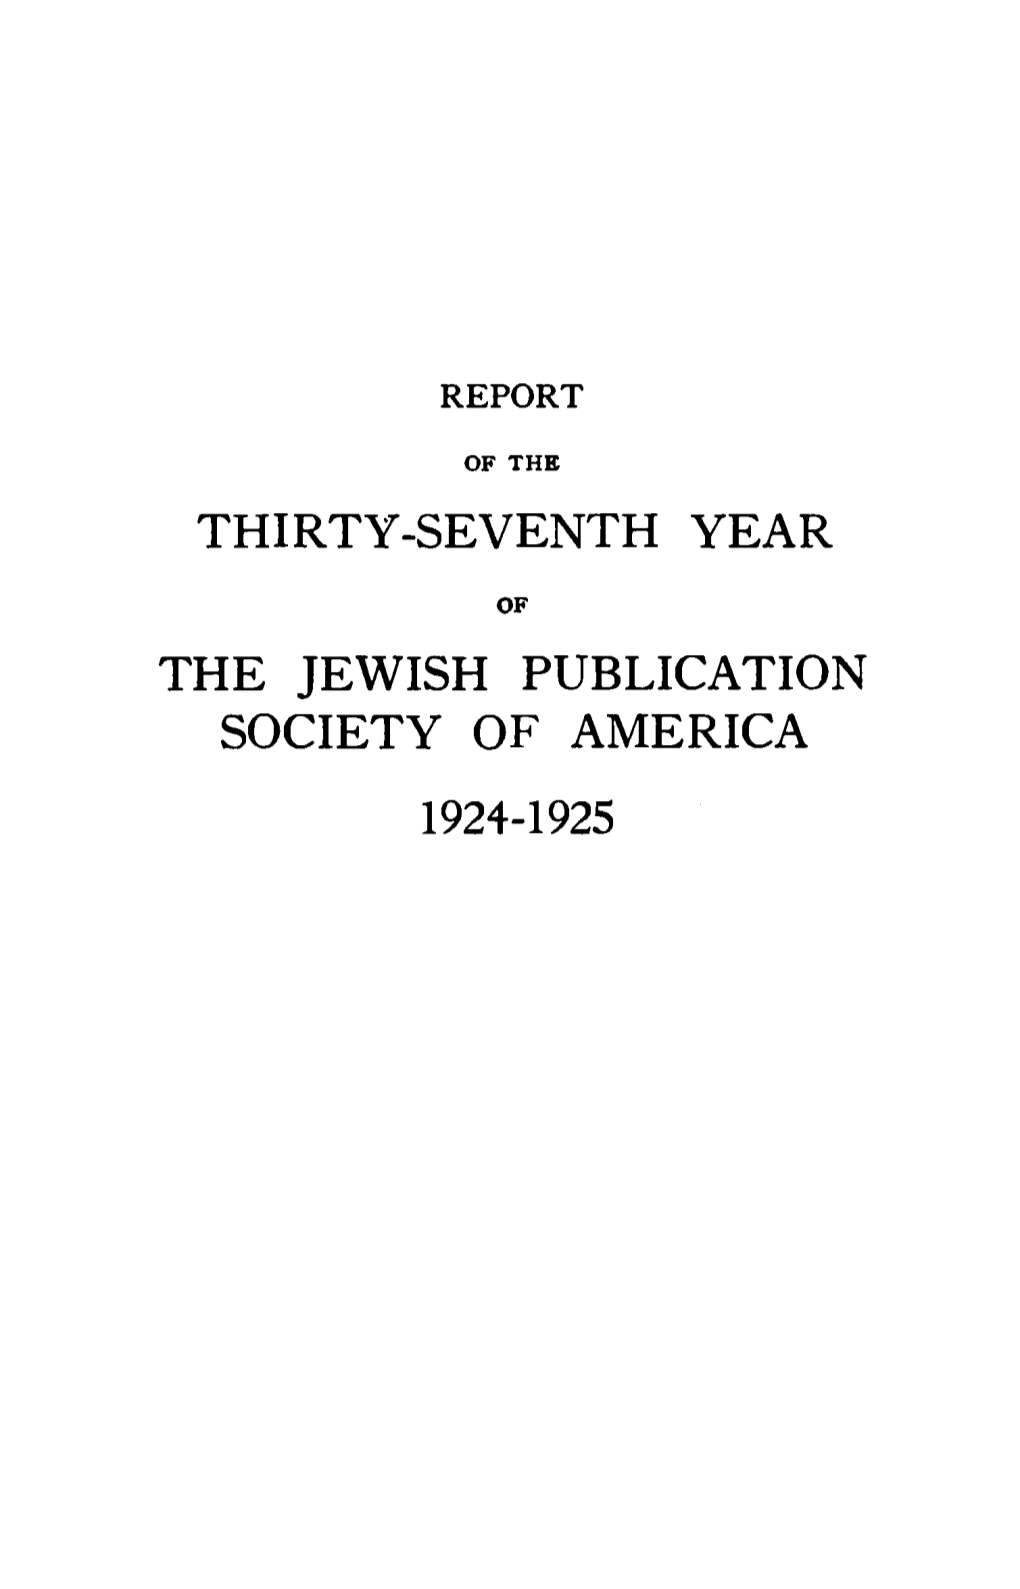 Thirty-Seventh Year the Jewish Publication Society